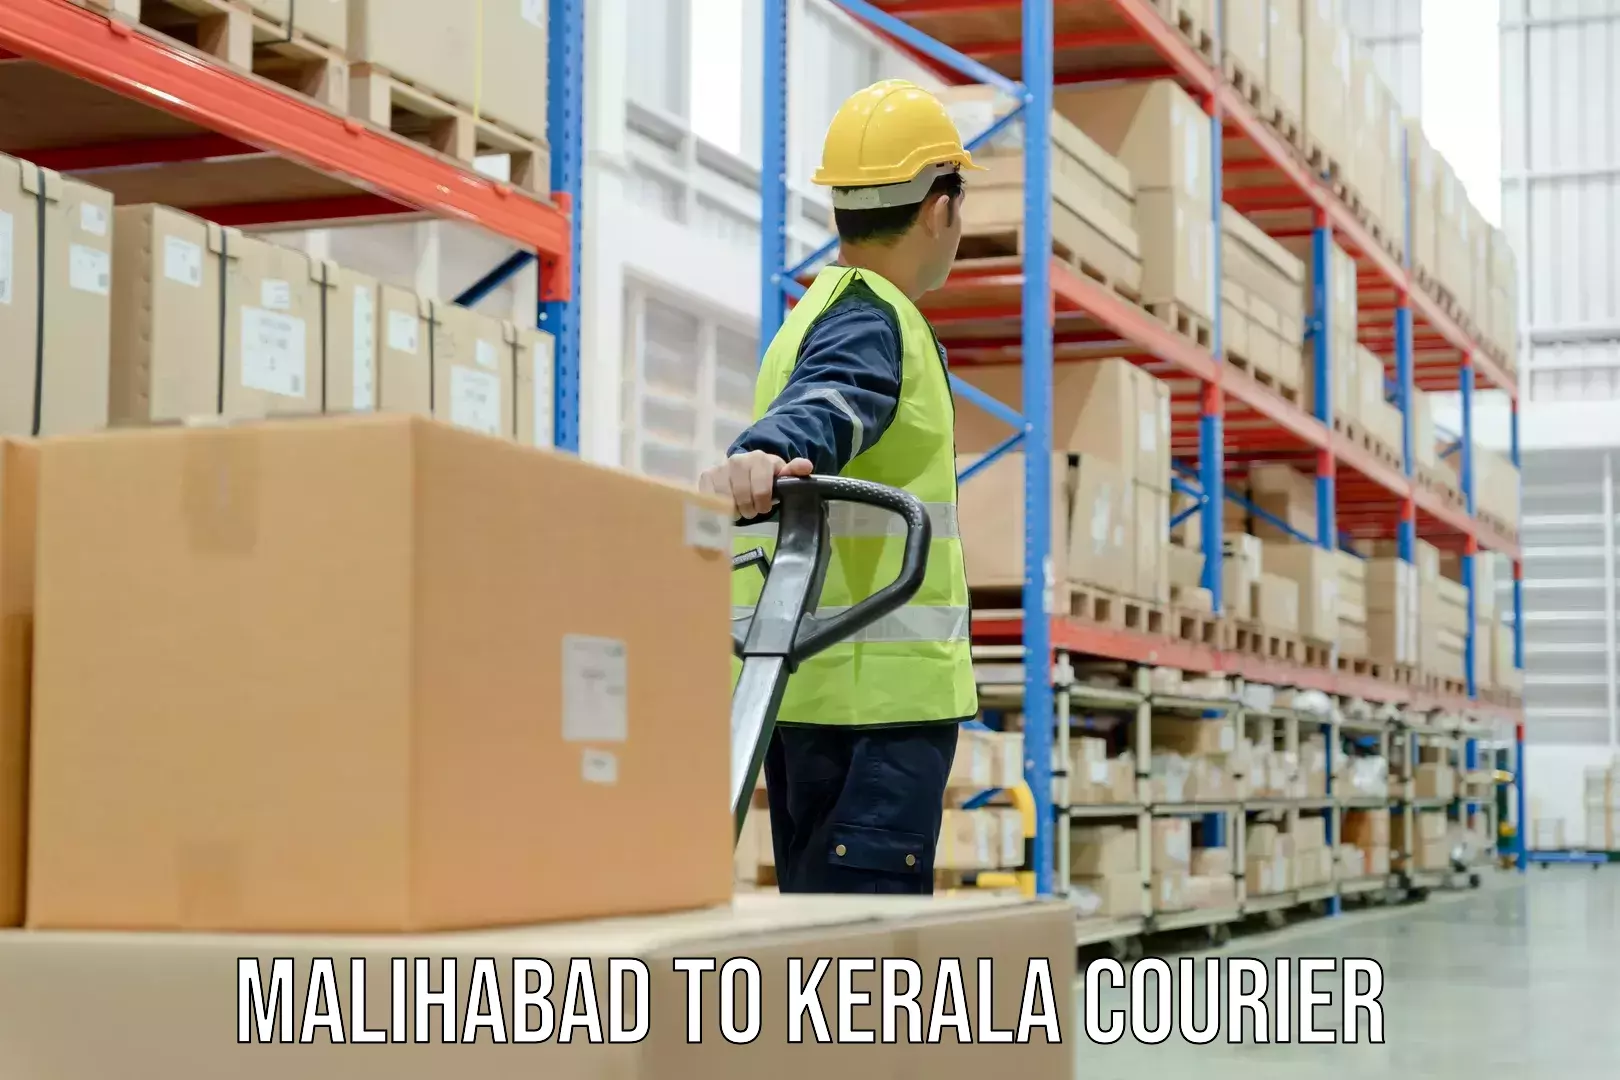 Local delivery service Malihabad to Kochi